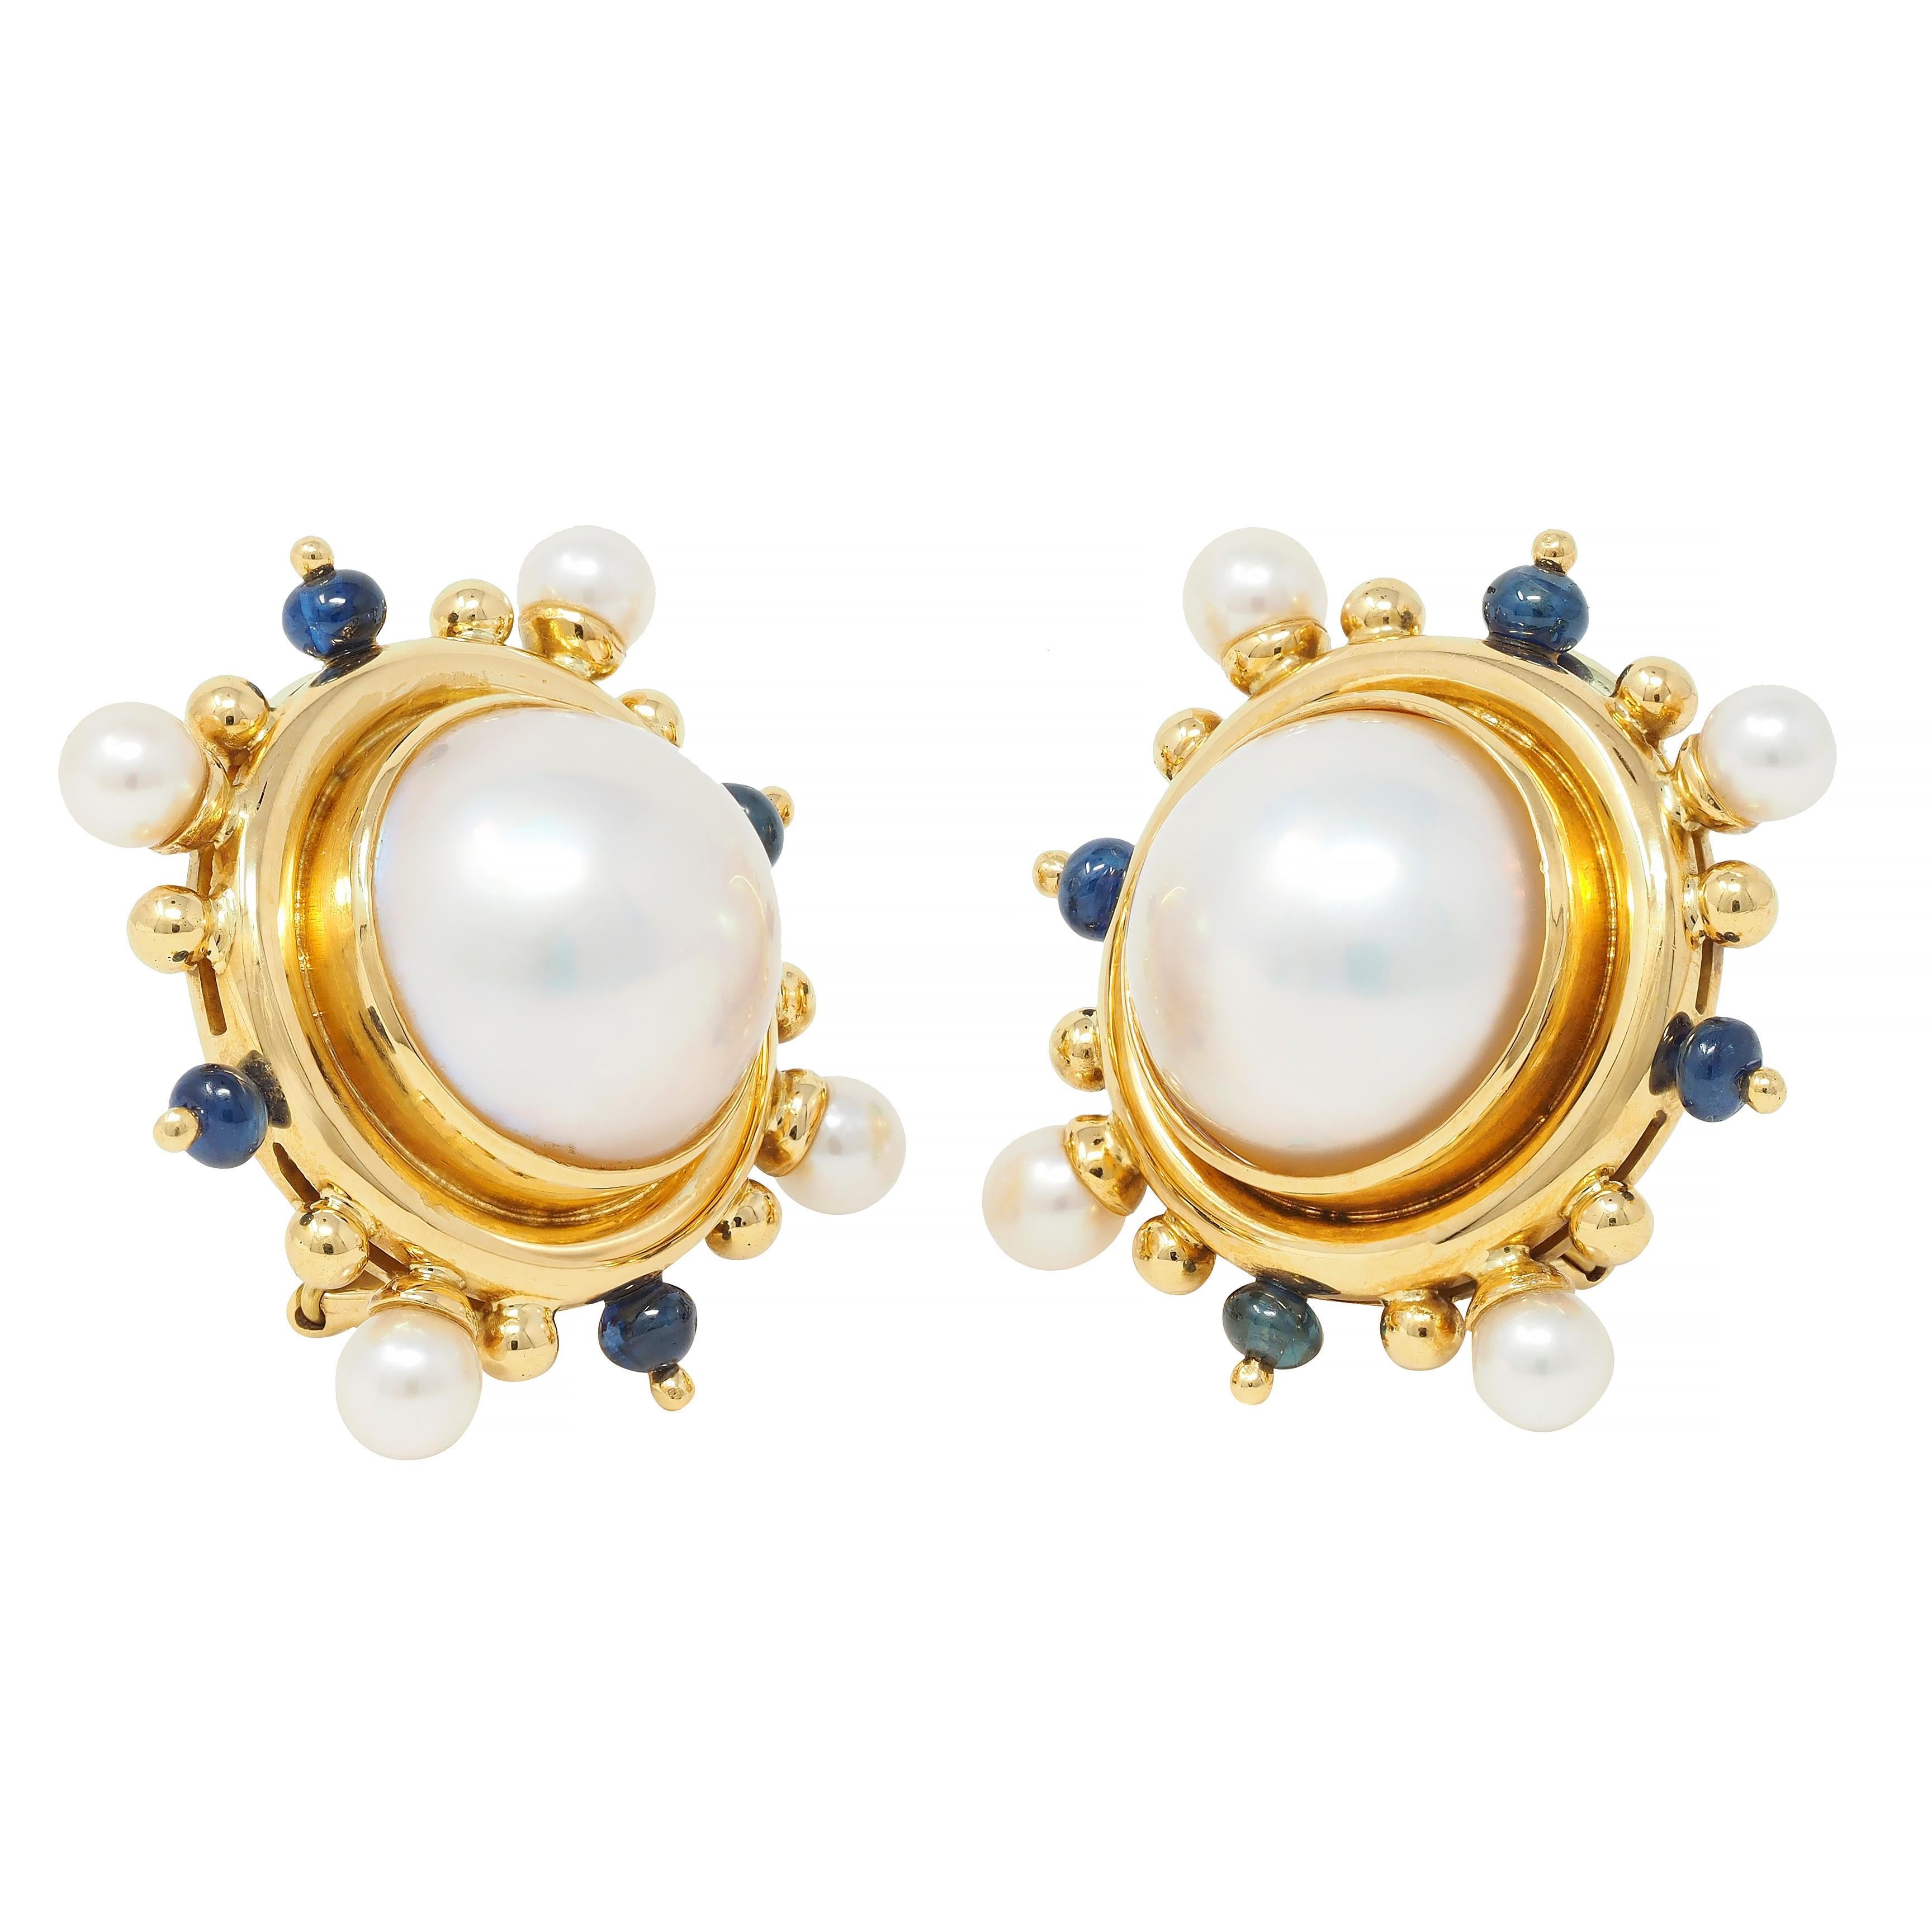 Centering a 14.0 mm round button pearls - white in body color with strong iridescence
Bezel set with well-matched 4.5 mm round pearls in ridged surround 
Featuring a radial burst pattern with gold and sapphire beads 
Sapphire beads measure 3.0 mm